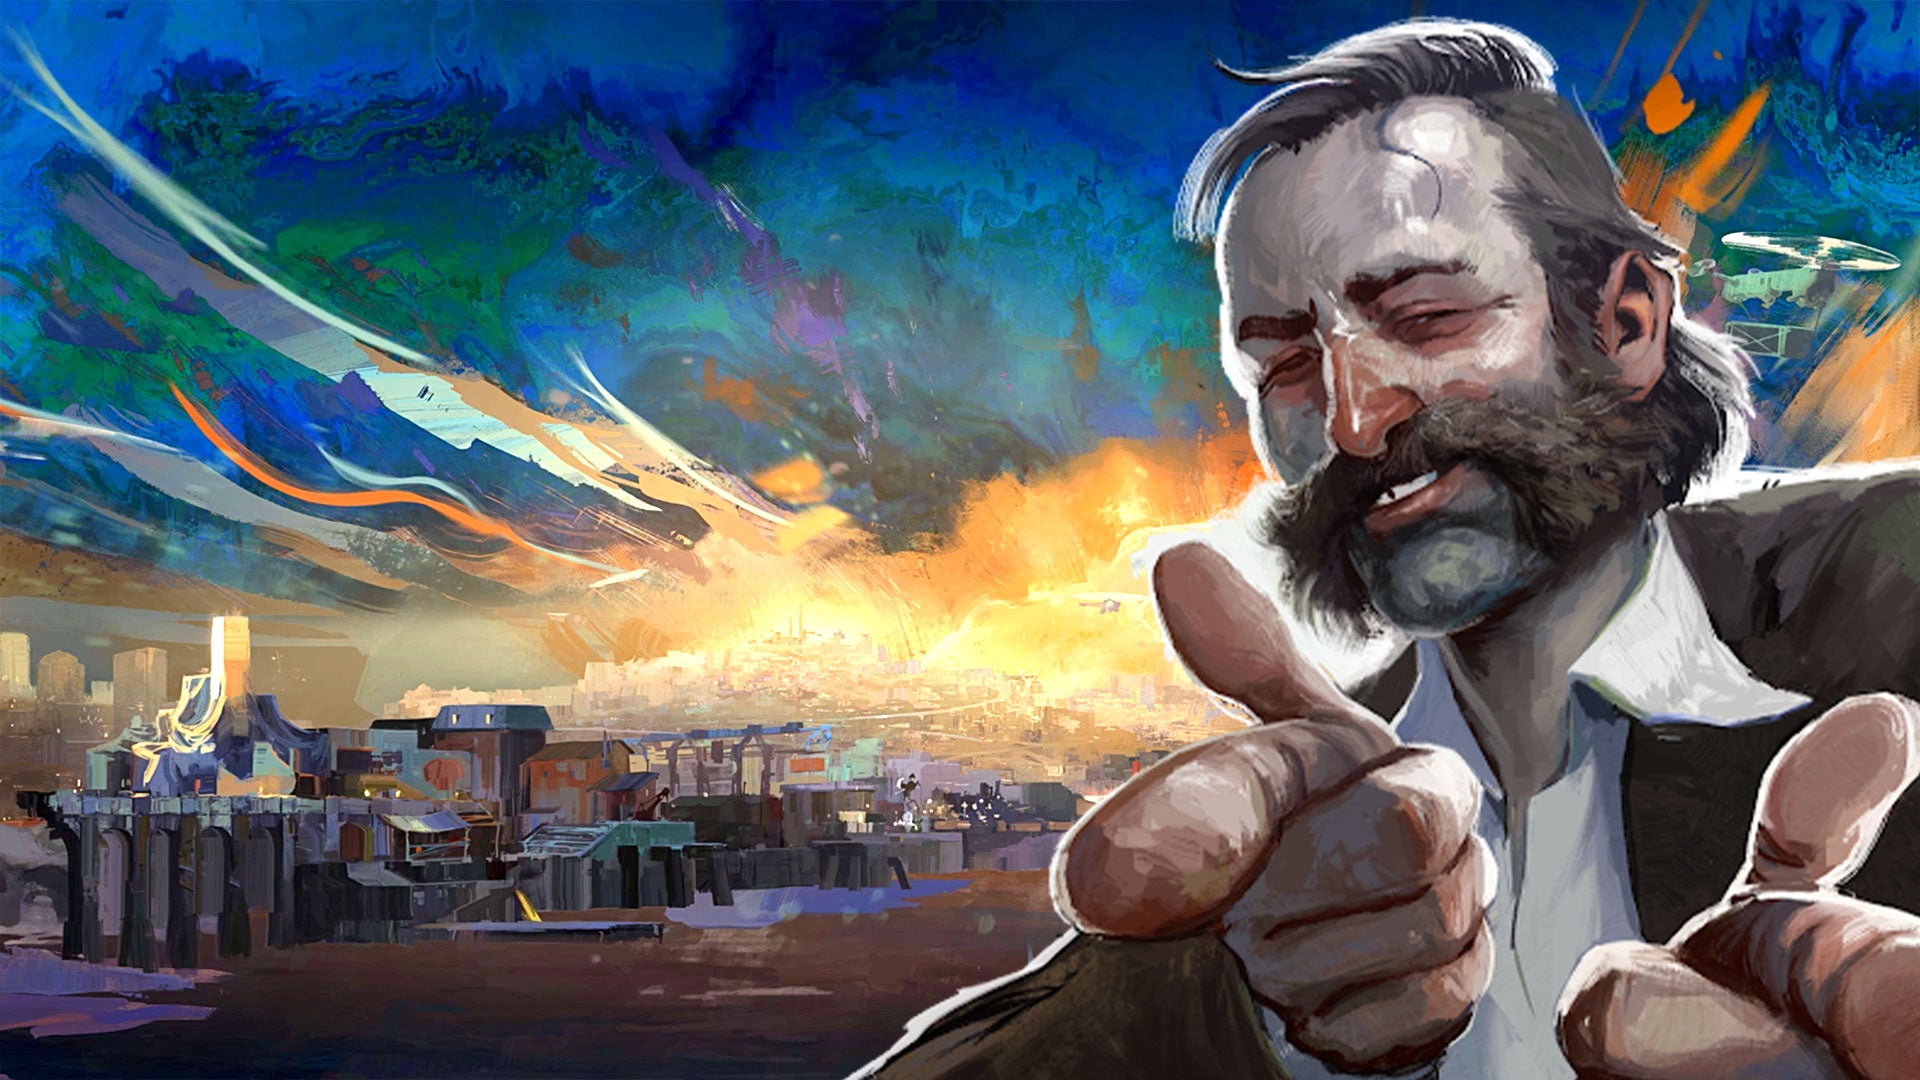  Disco Elysium, an 'irresponsibly deep detective RPG' and the 'frankly audacious' crown jewel in our Top 100 PC games list, has its price slashed by 75% 